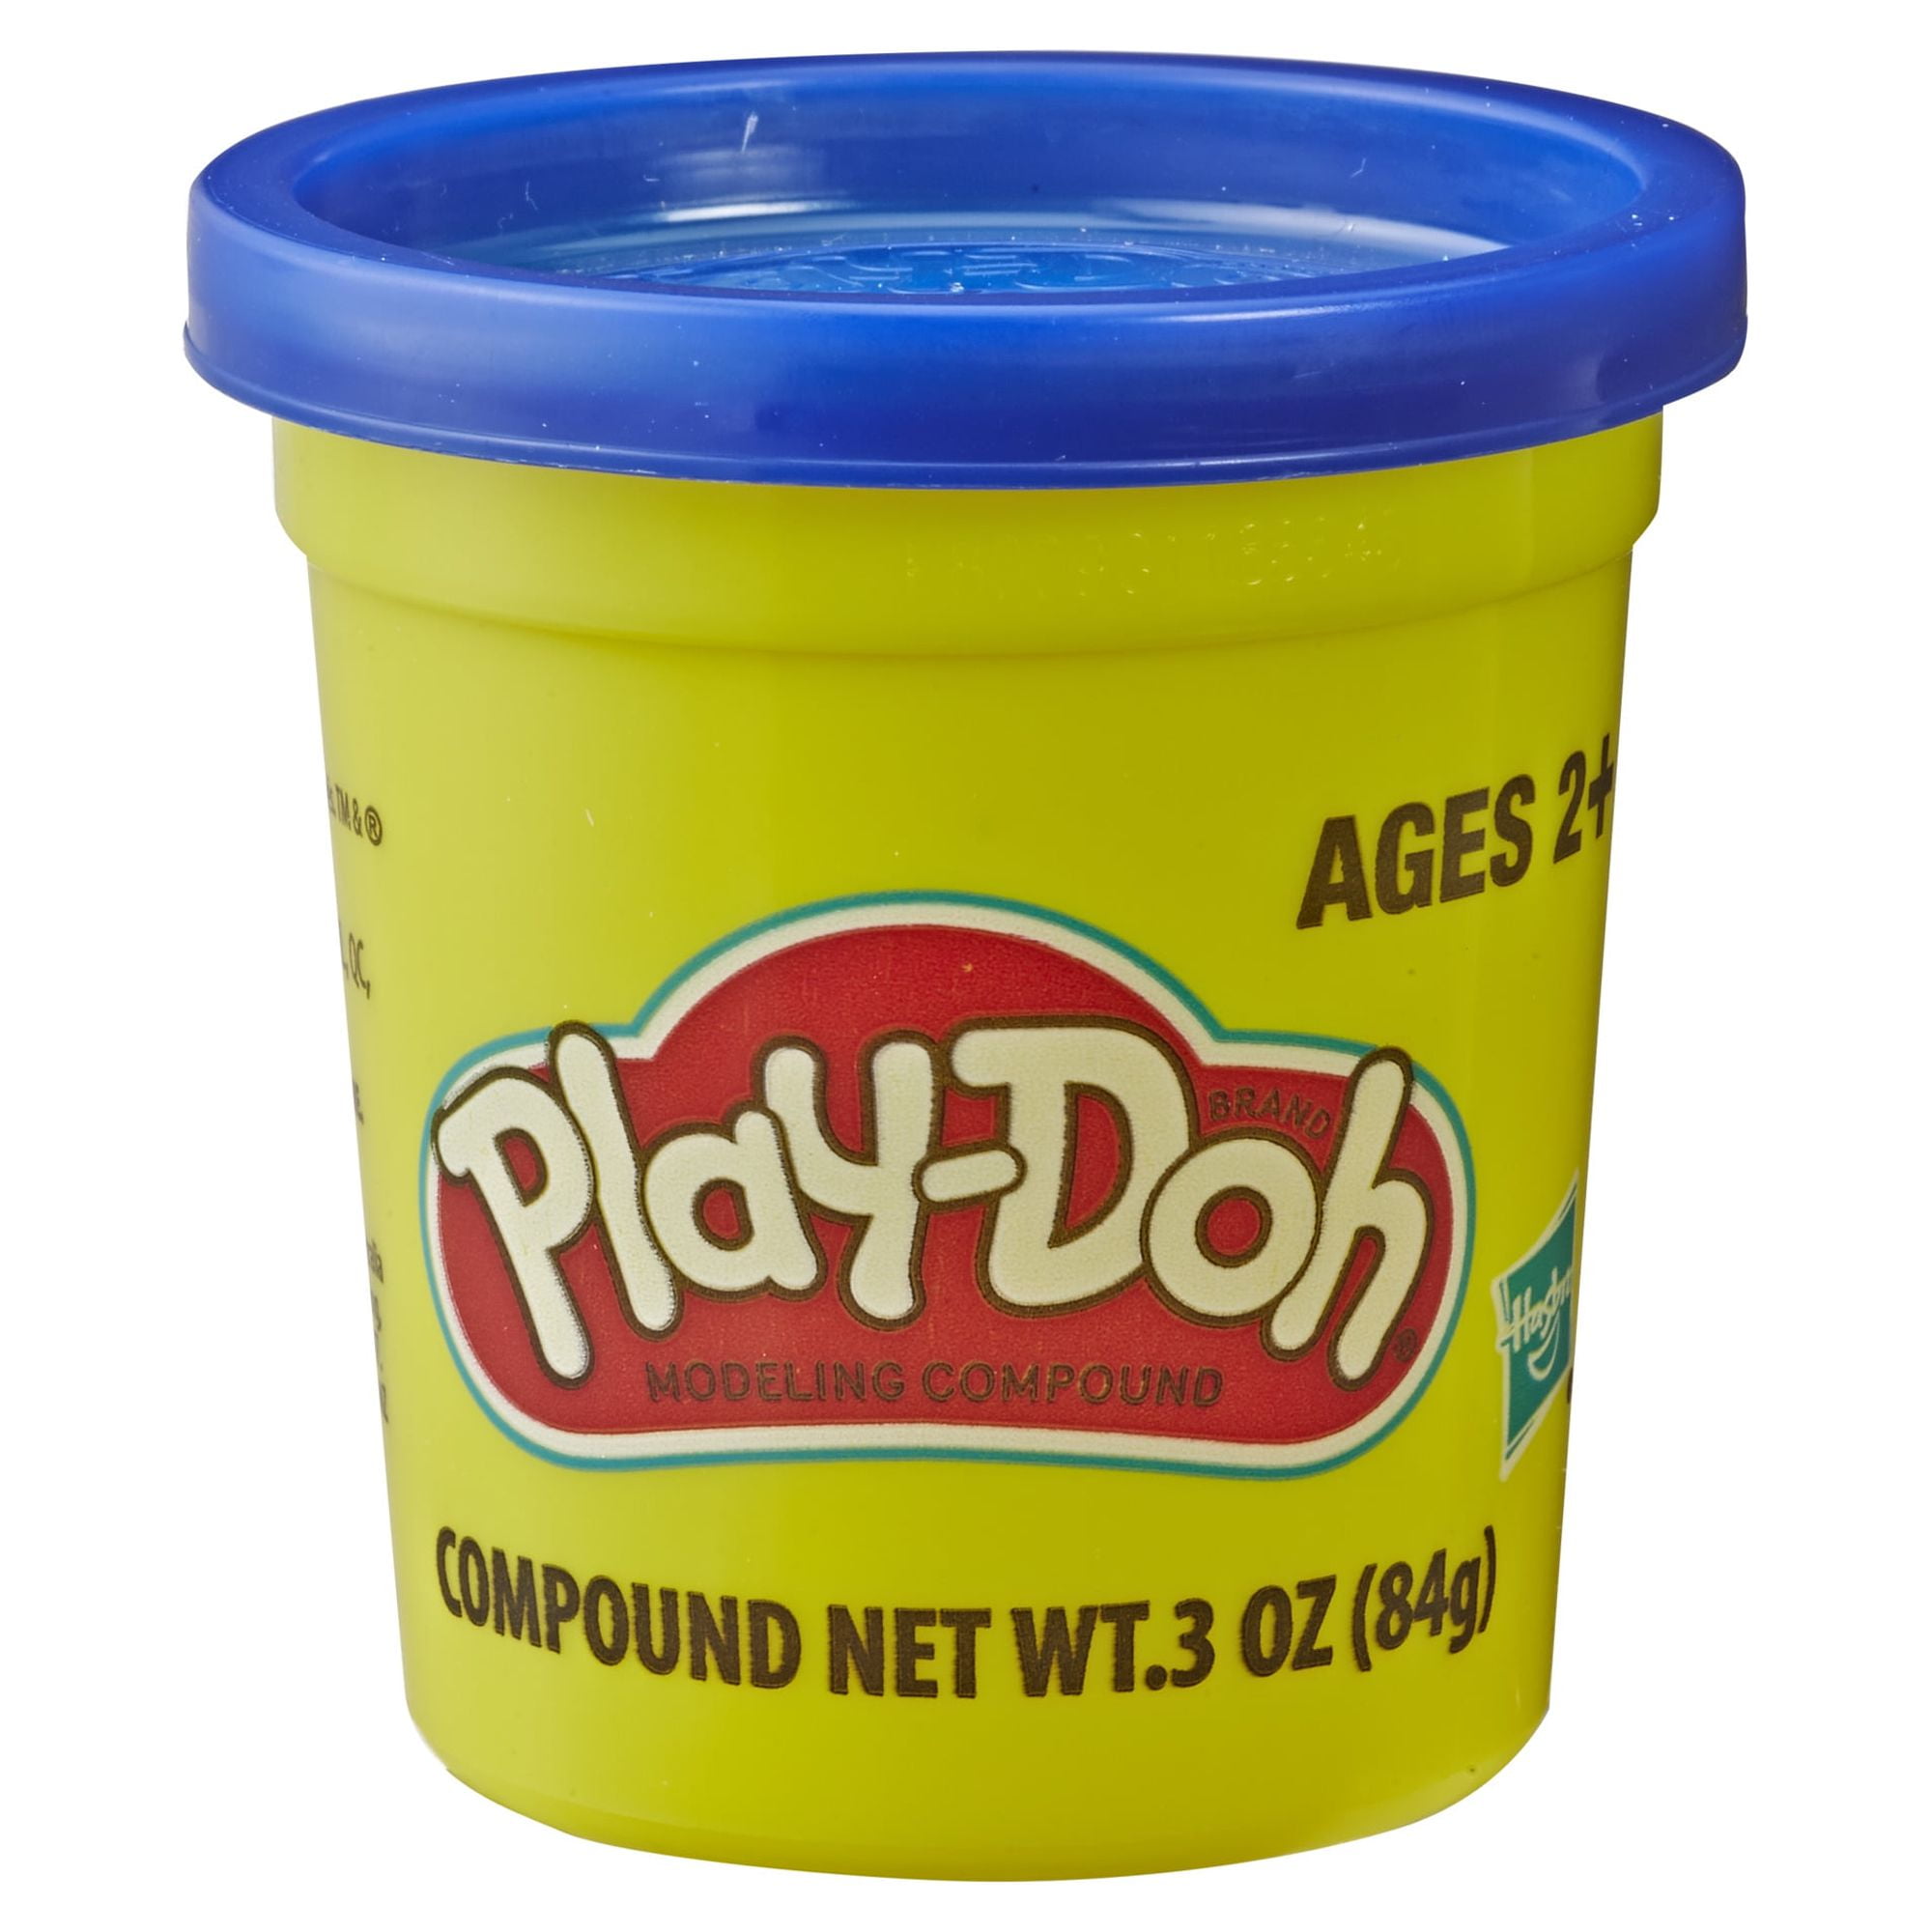 Kiddy Dough 80 Pack of Dough - School & Birthday Party Favors Bulk Clay  Classpack - Includes Molded Animal Shaped Lids - Holiday Christmas Gift  Edition (1oz Dough Tubs - 80oz Total)